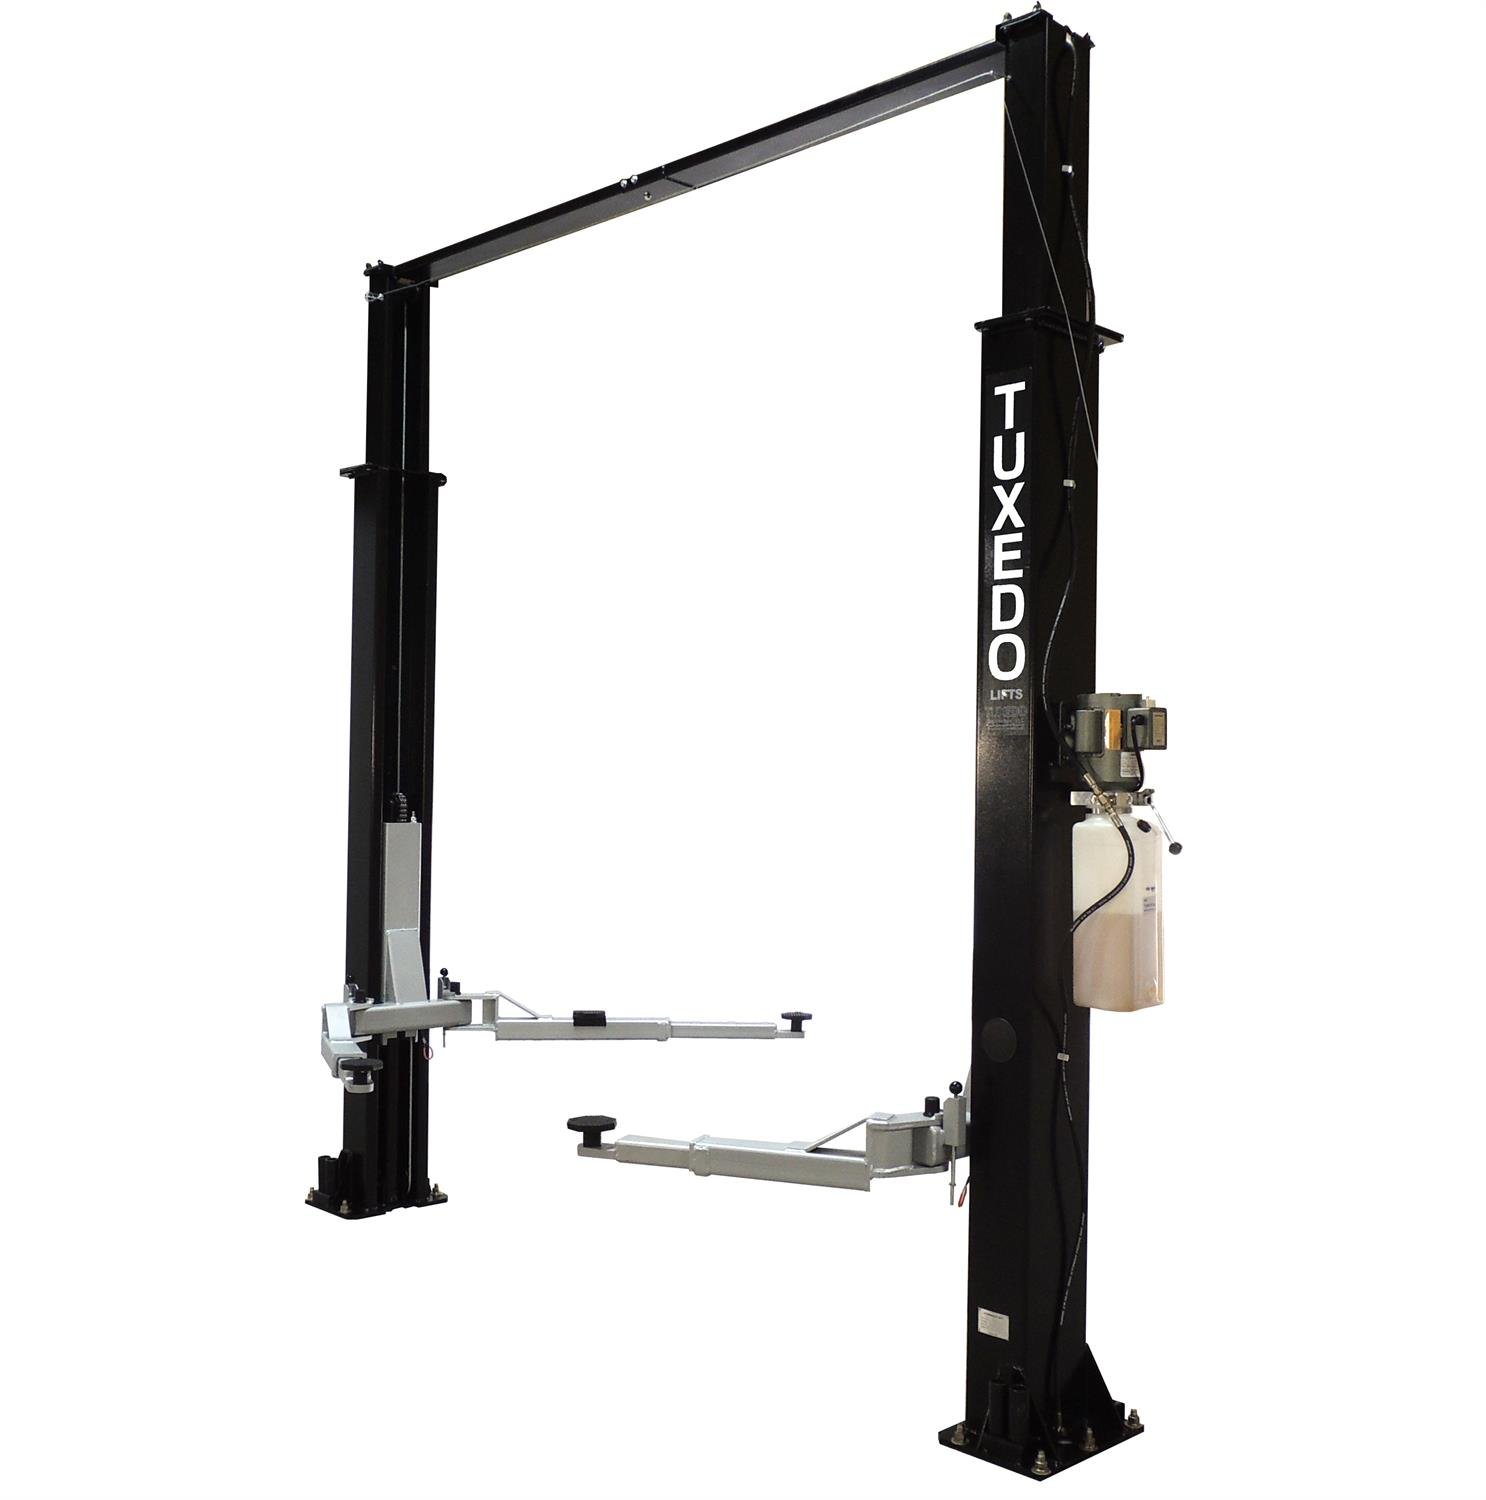 Light-Duty 2-Post Asymmetrical Automotive Lift with 9,000 lbs. Lifting Capacity with Clear Floor